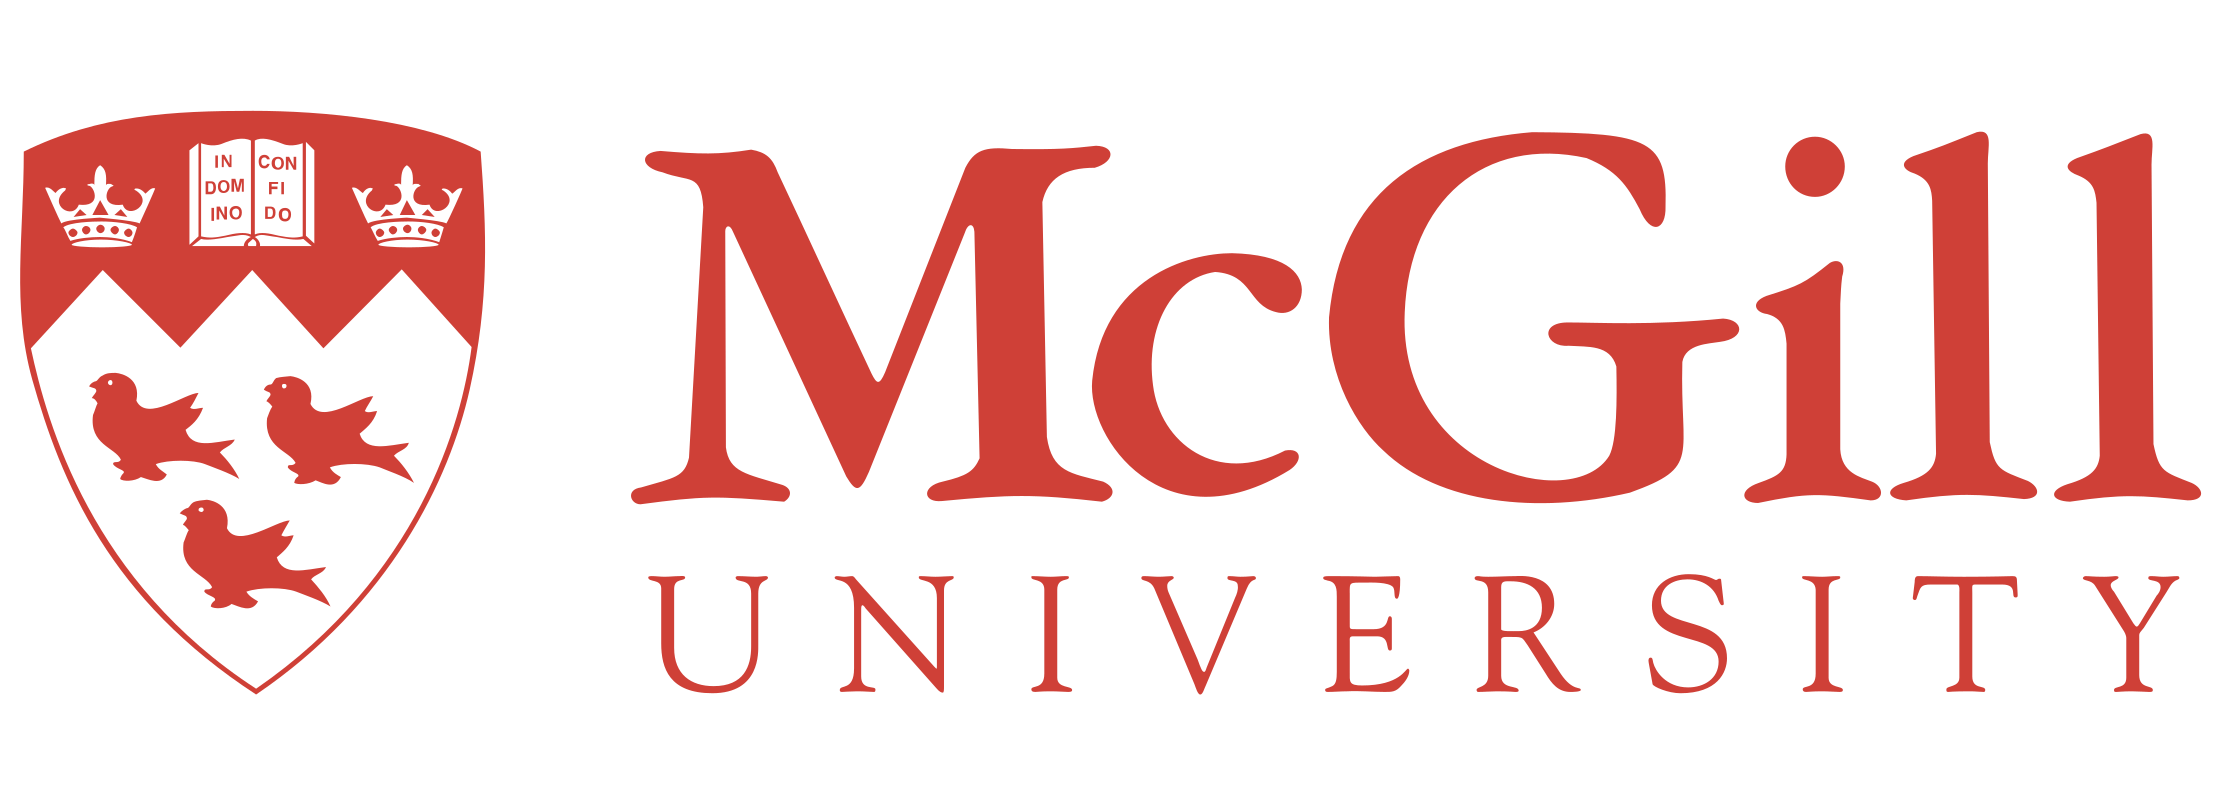 Epidemiology | Doctorate / PhD | Health & Well-Being | On Campus | McGill University | Canada